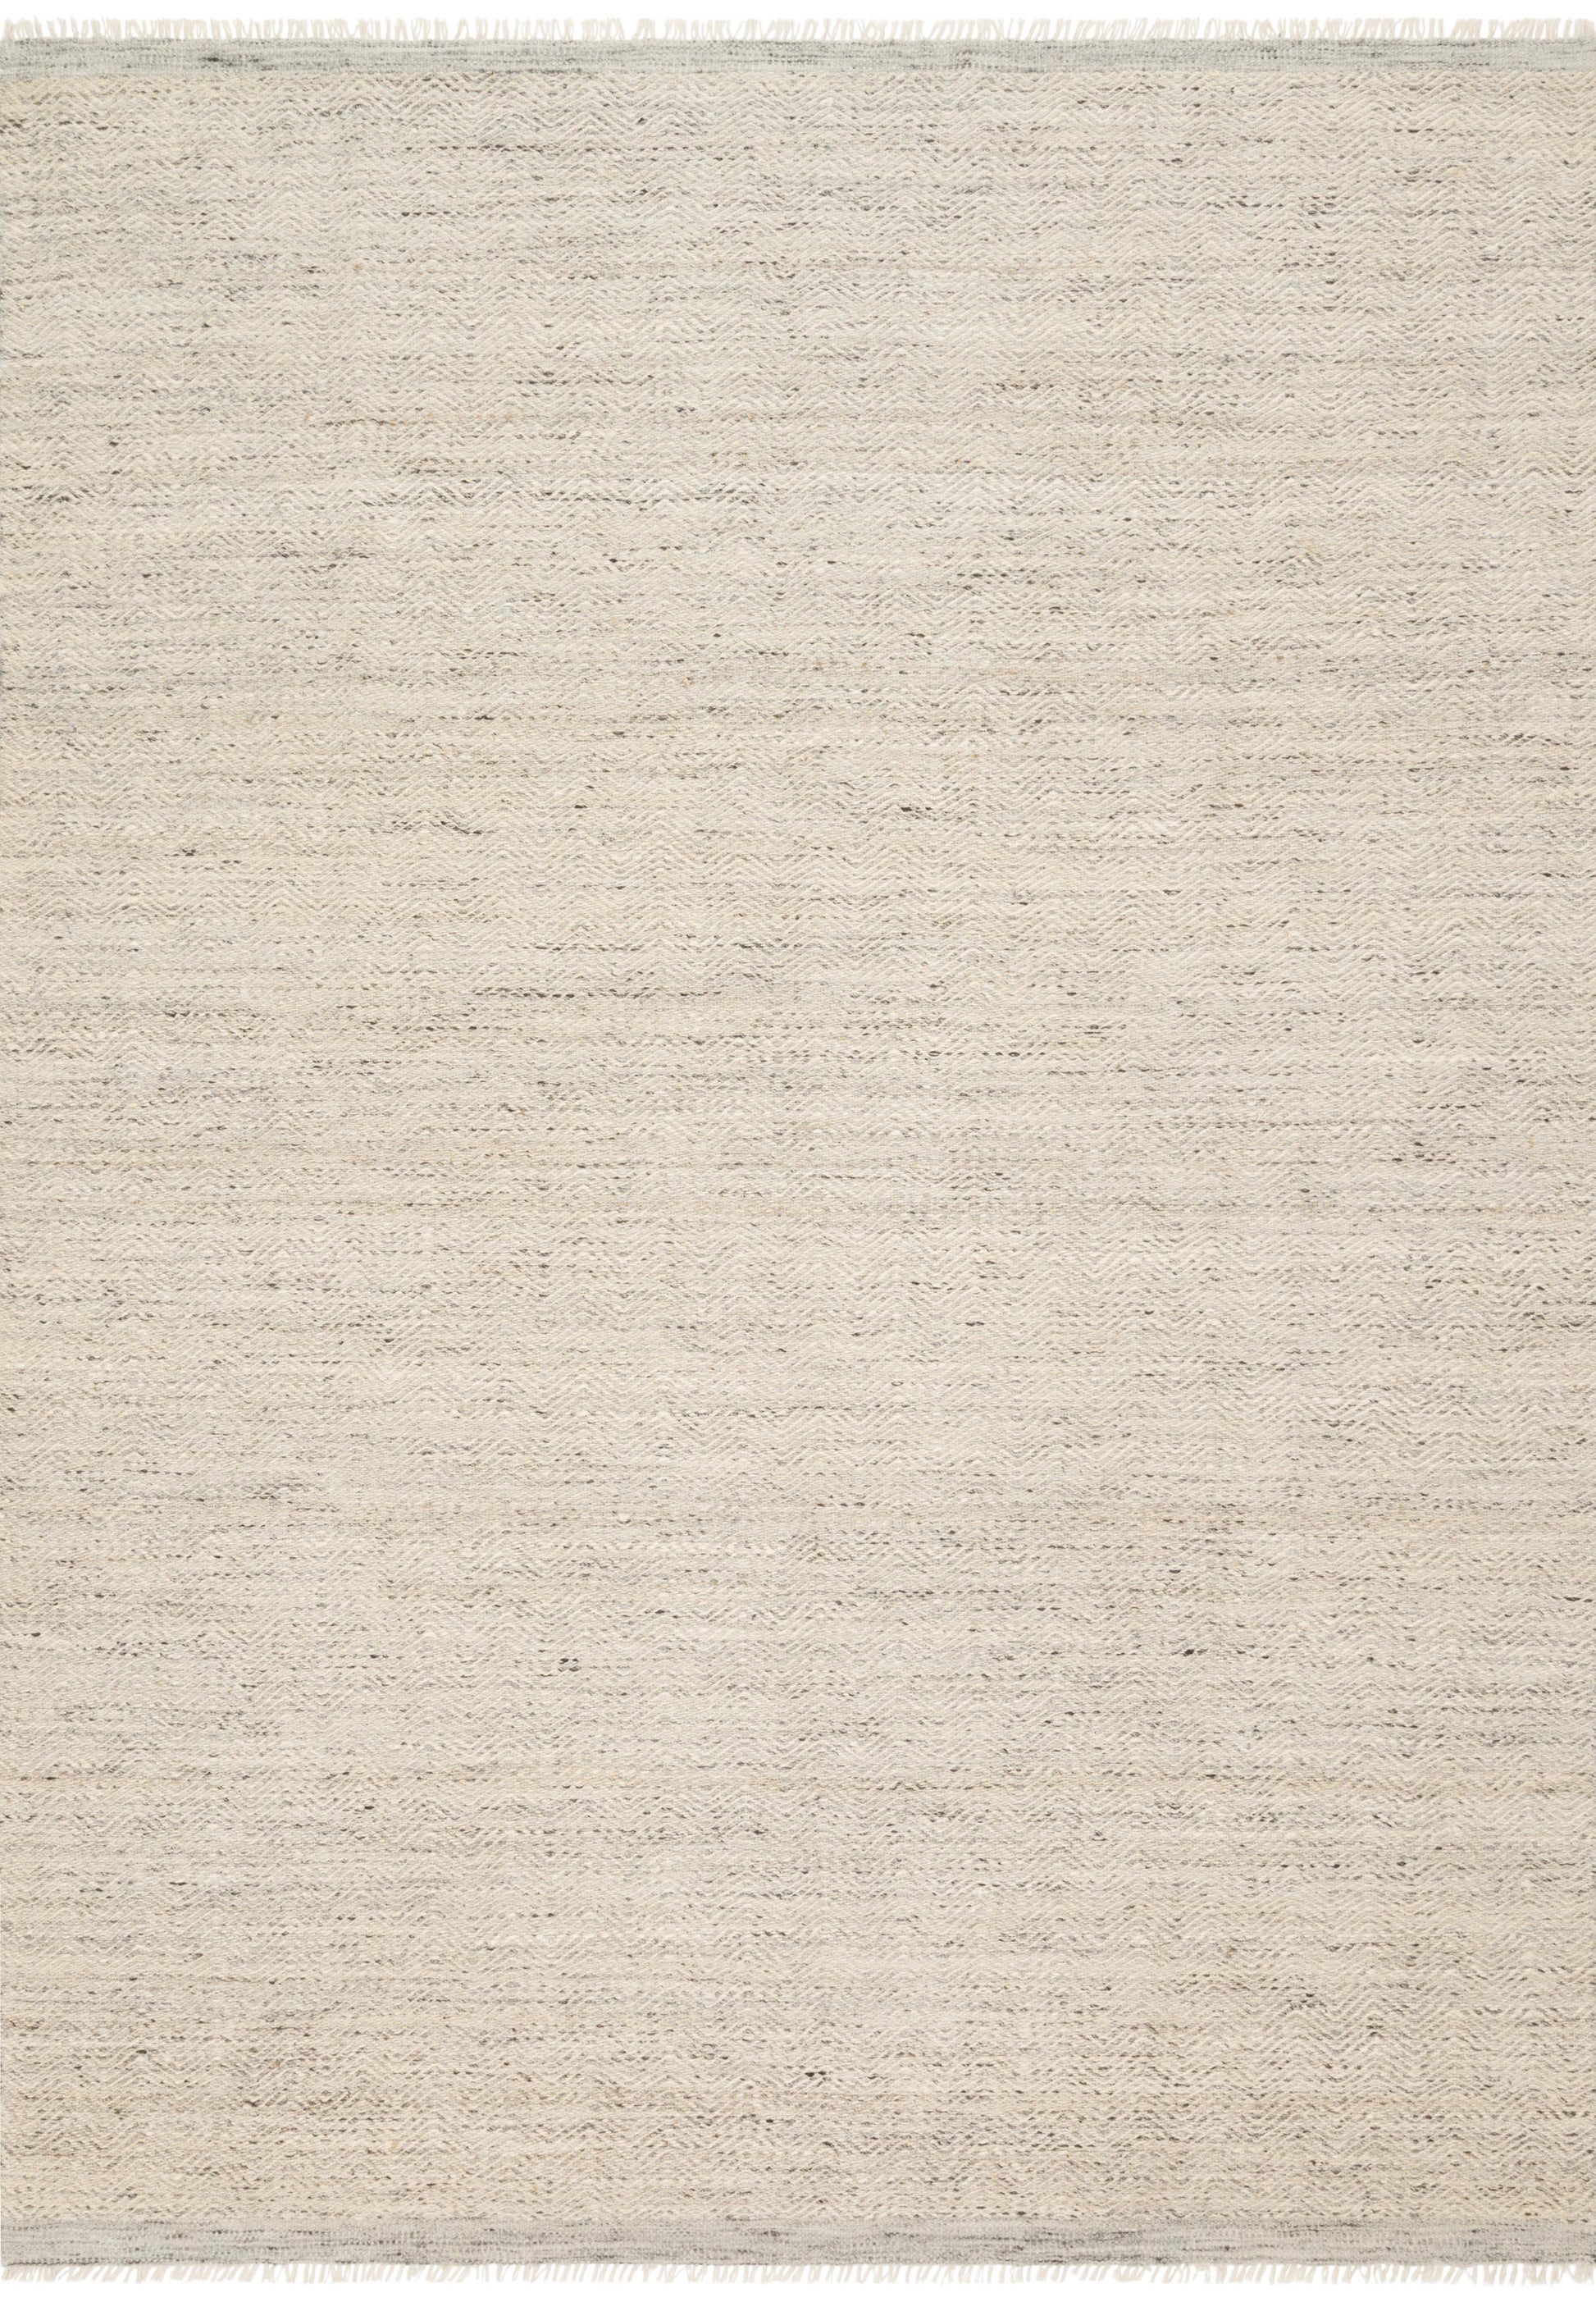 A picture of Loloi's Omen rug, in style OME-01, color Mist